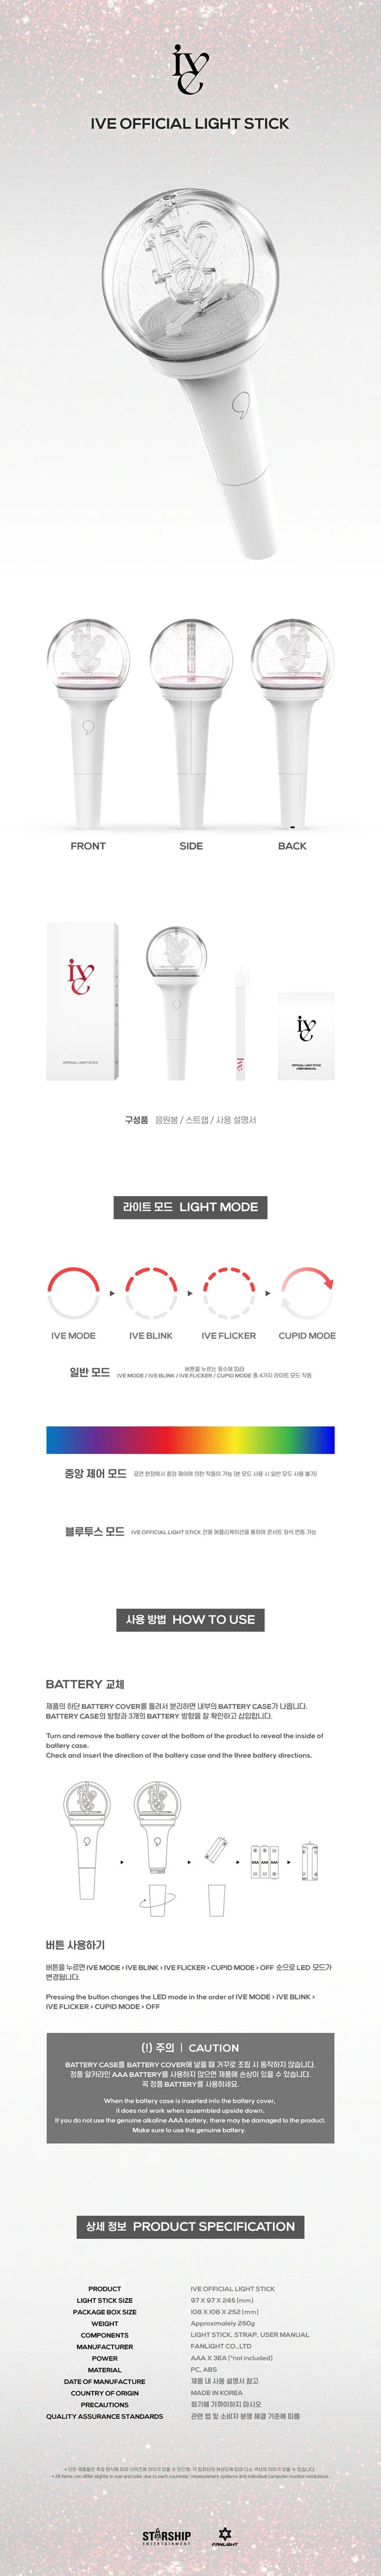 IVE Official Lightstick Infographic